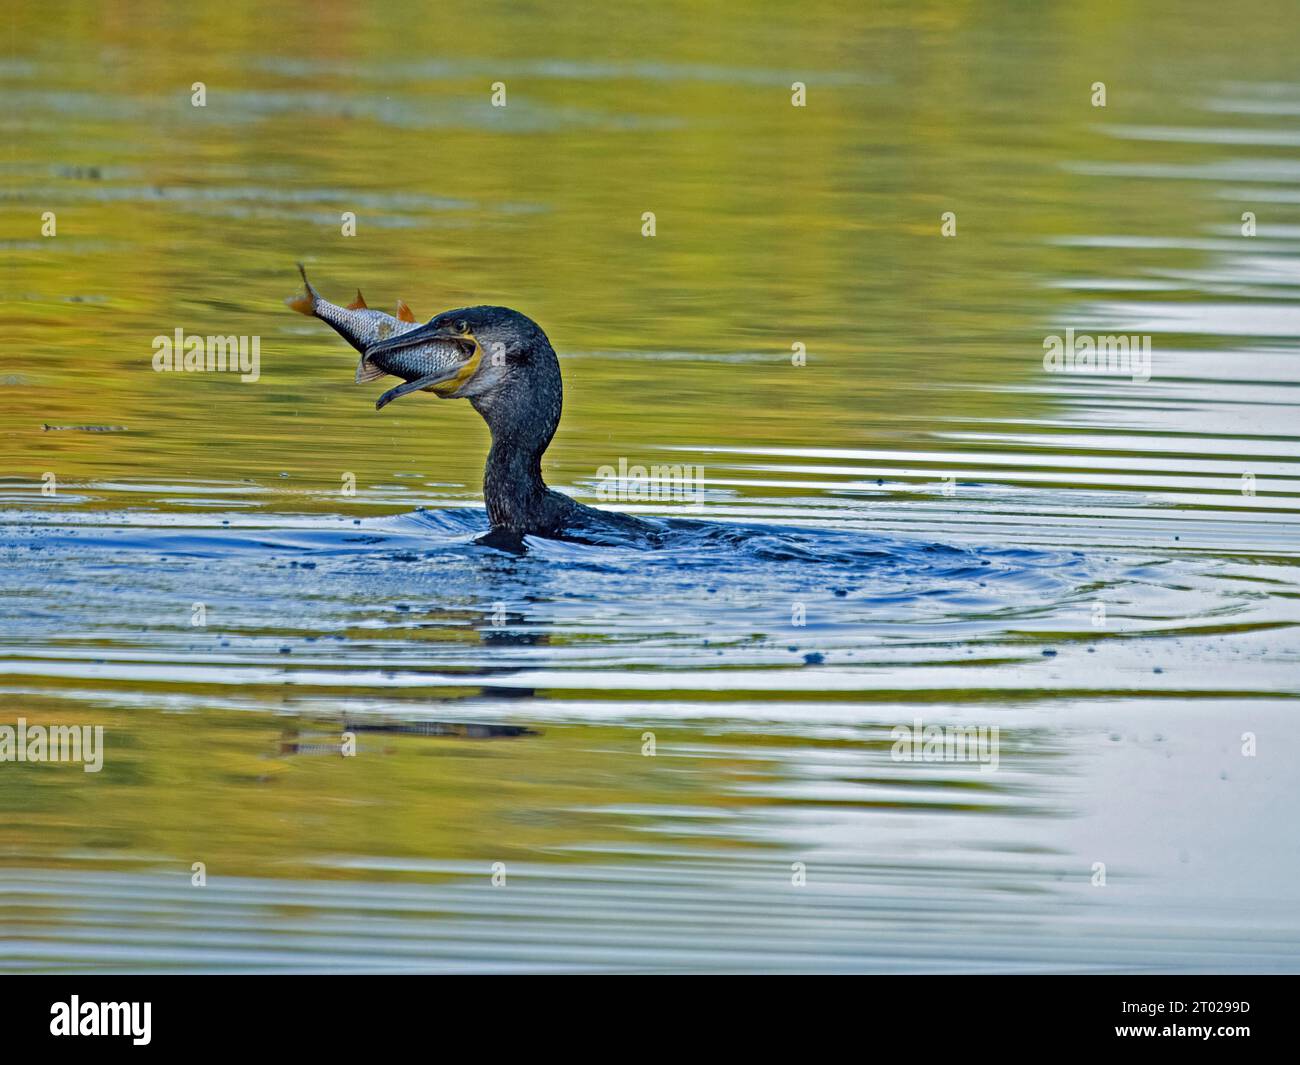 Great Cormorant (Phalacrocorax carbo) swallows fish catch of Roach (Rutilus rutilus) in inland waterway & golden green rippled reflections England UK Stock Photo